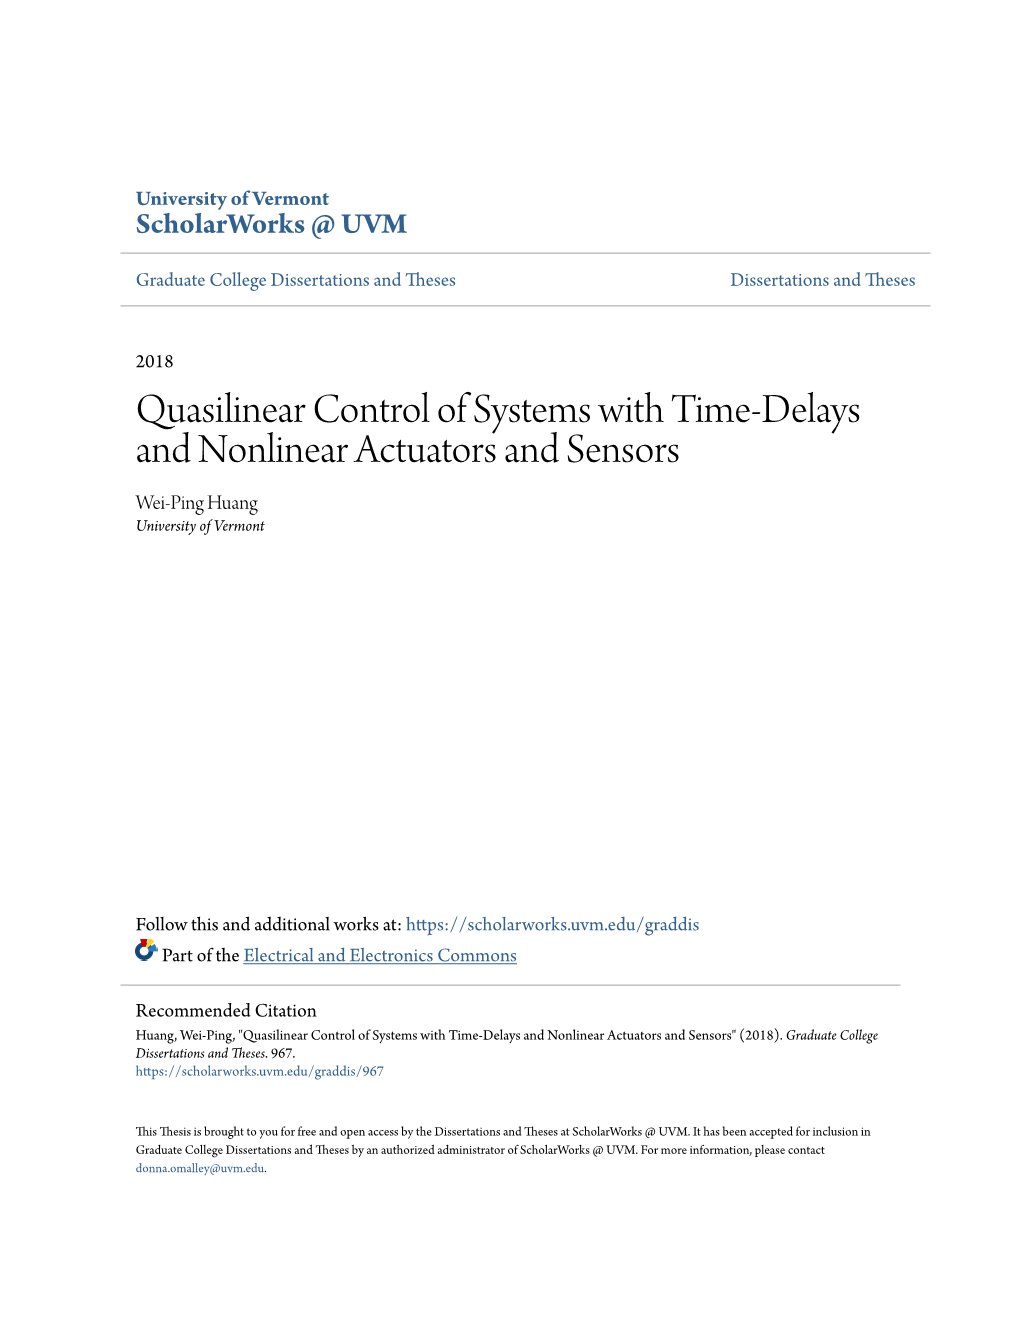 Quasilinear Control of Systems with Time-Delays and Nonlinear Actuators and Sensors Wei-Ping Huang University of Vermont